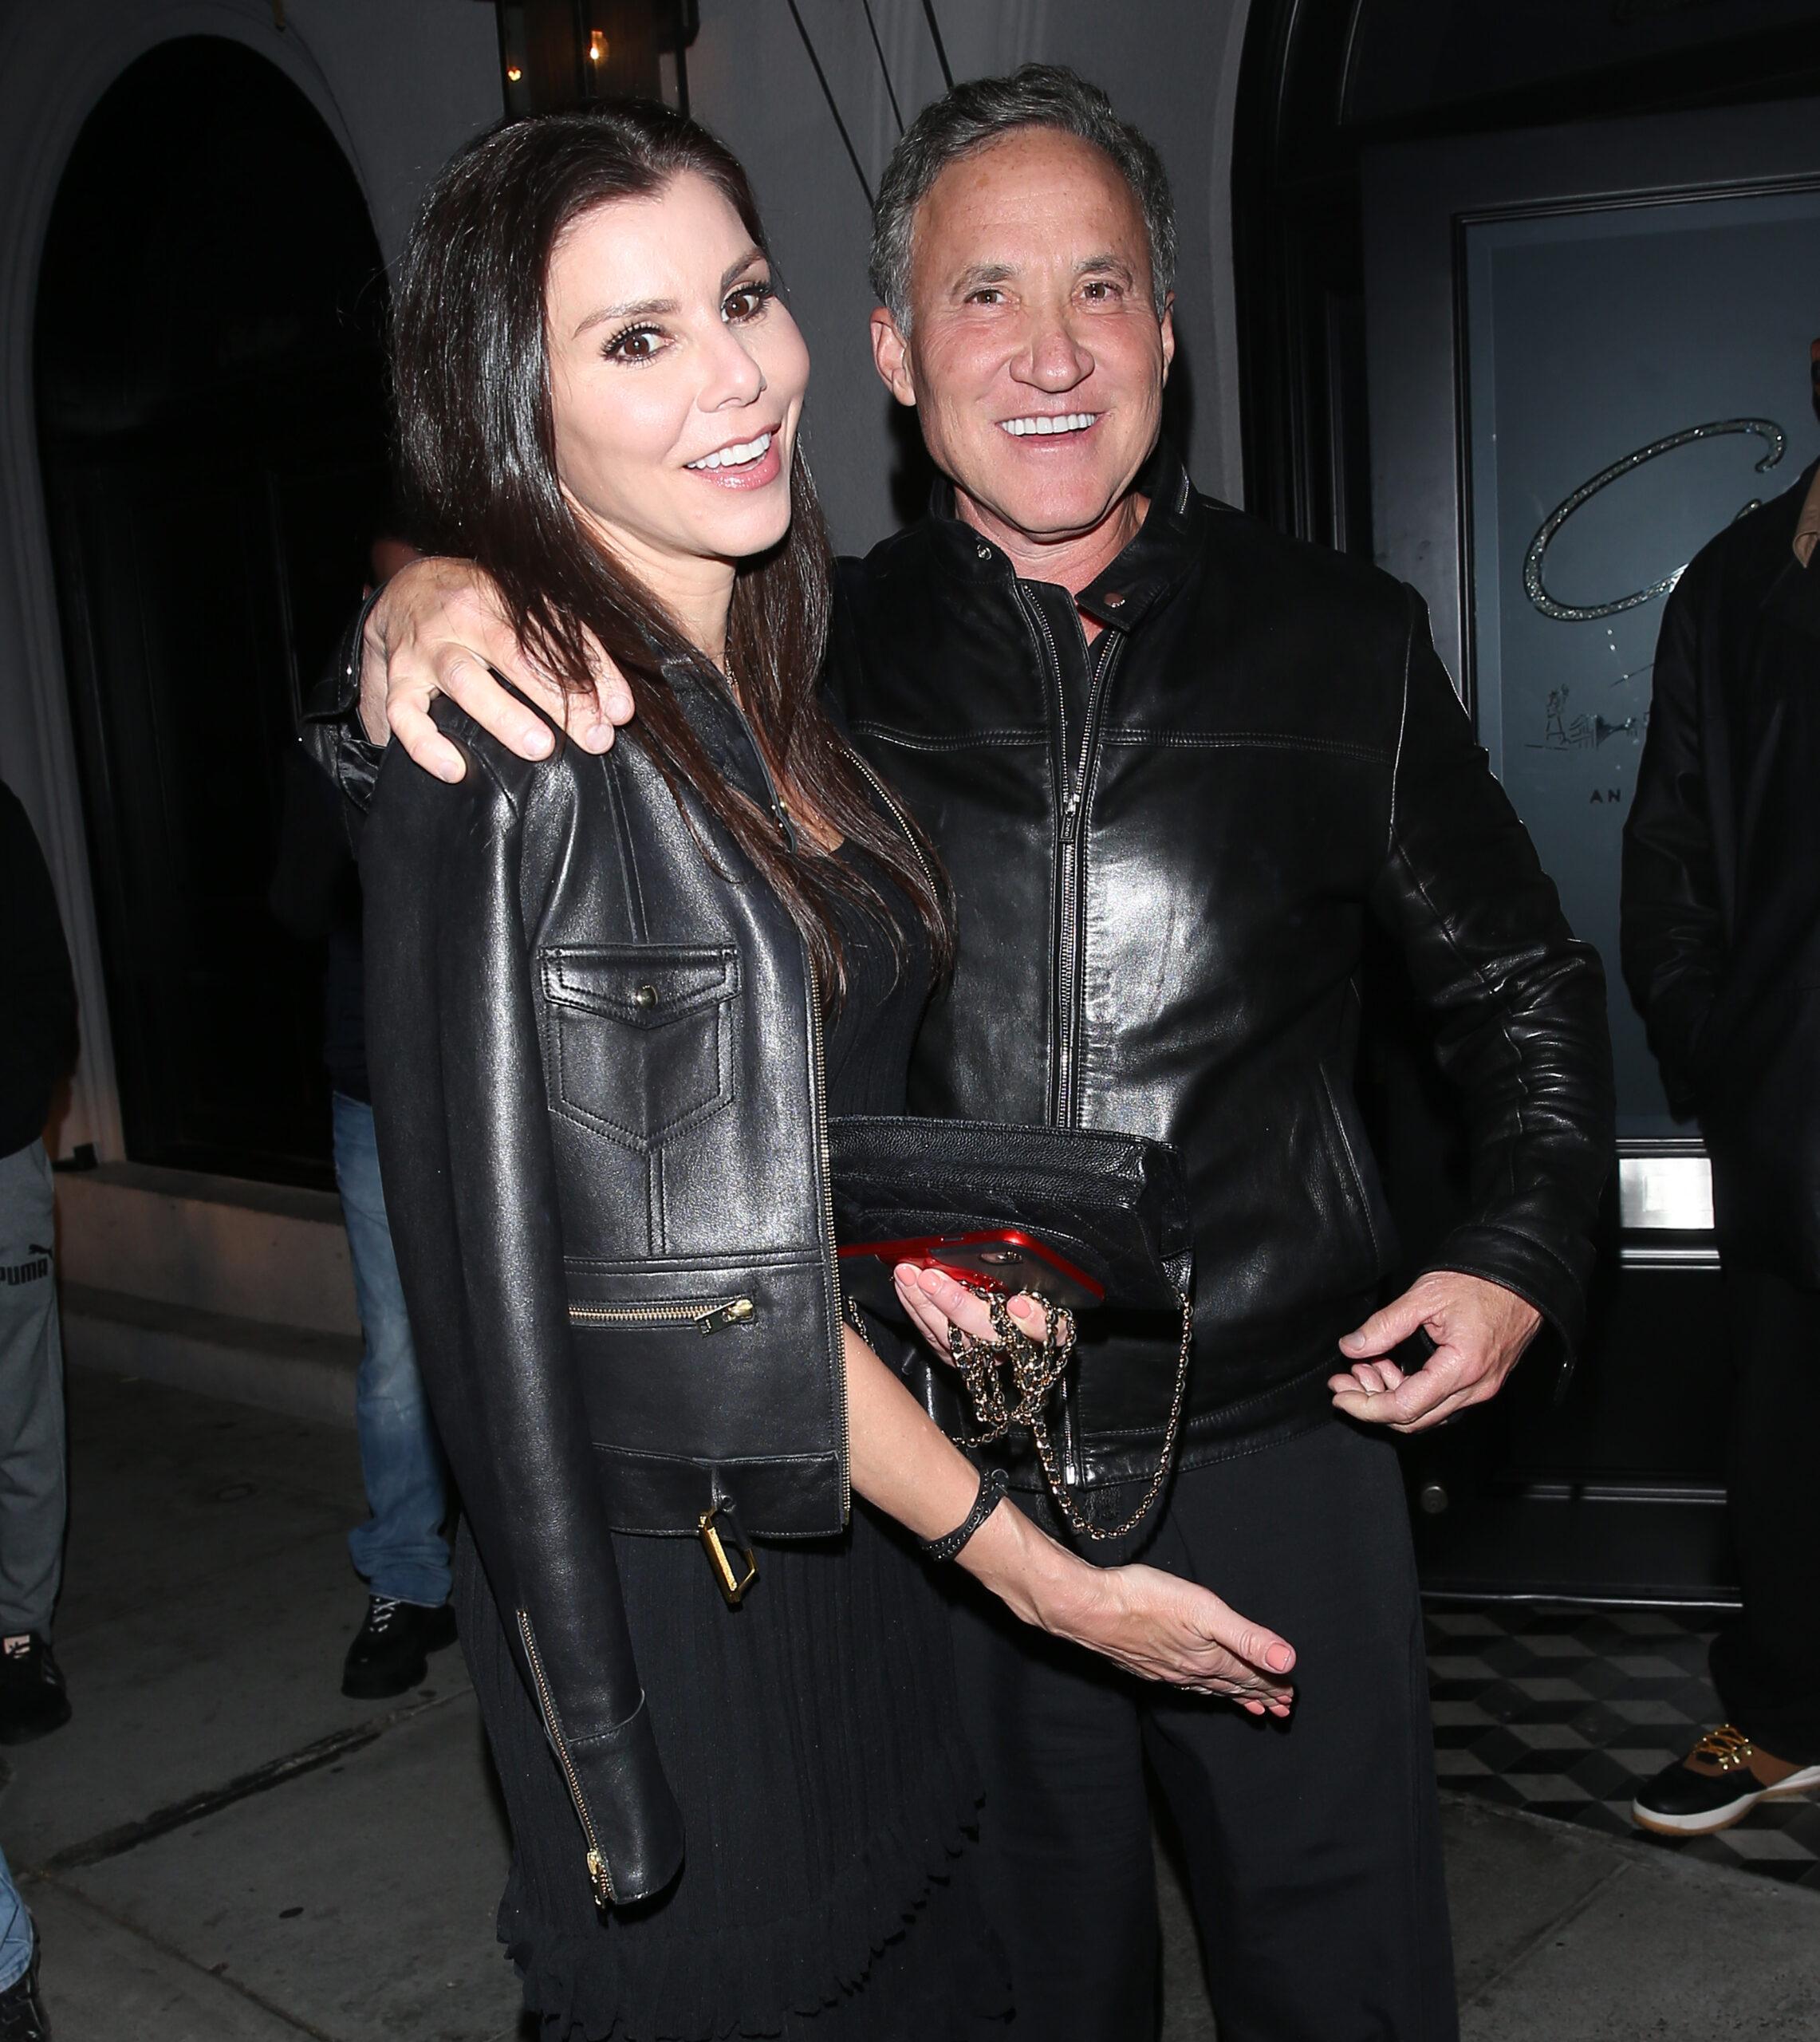 Heather & Terry Dubrow seen leaving dinner at 'Craigs' Restaurant in West Hollywood, CA